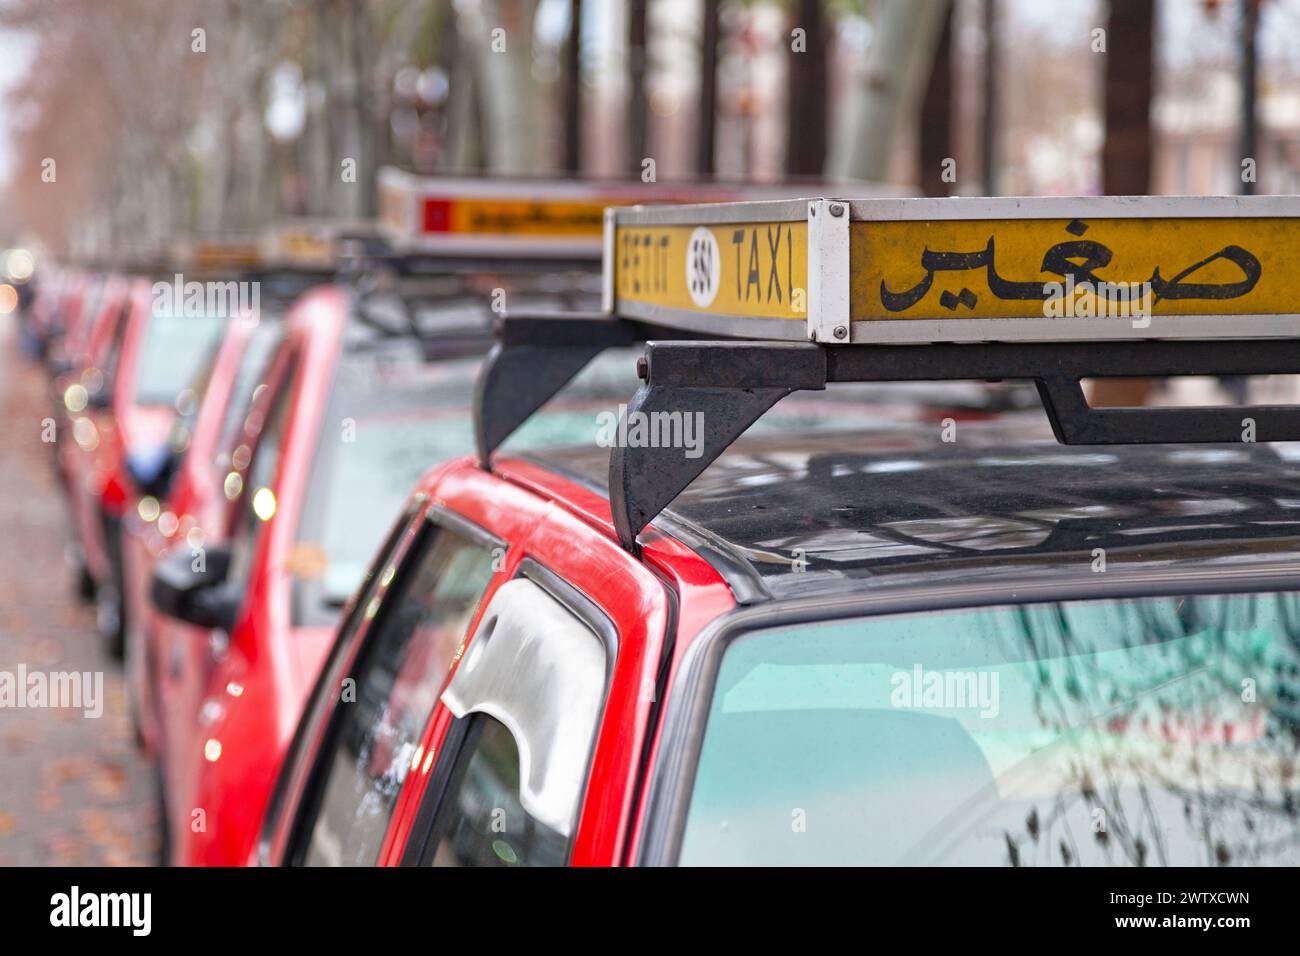 Fez, Morocco - January 202019: Row of red 'Petit Taxi'. In Morocco, taxis are divided in two categories, Petit Taxi (English: Small Taxi) and Grand Ta Stock Photo